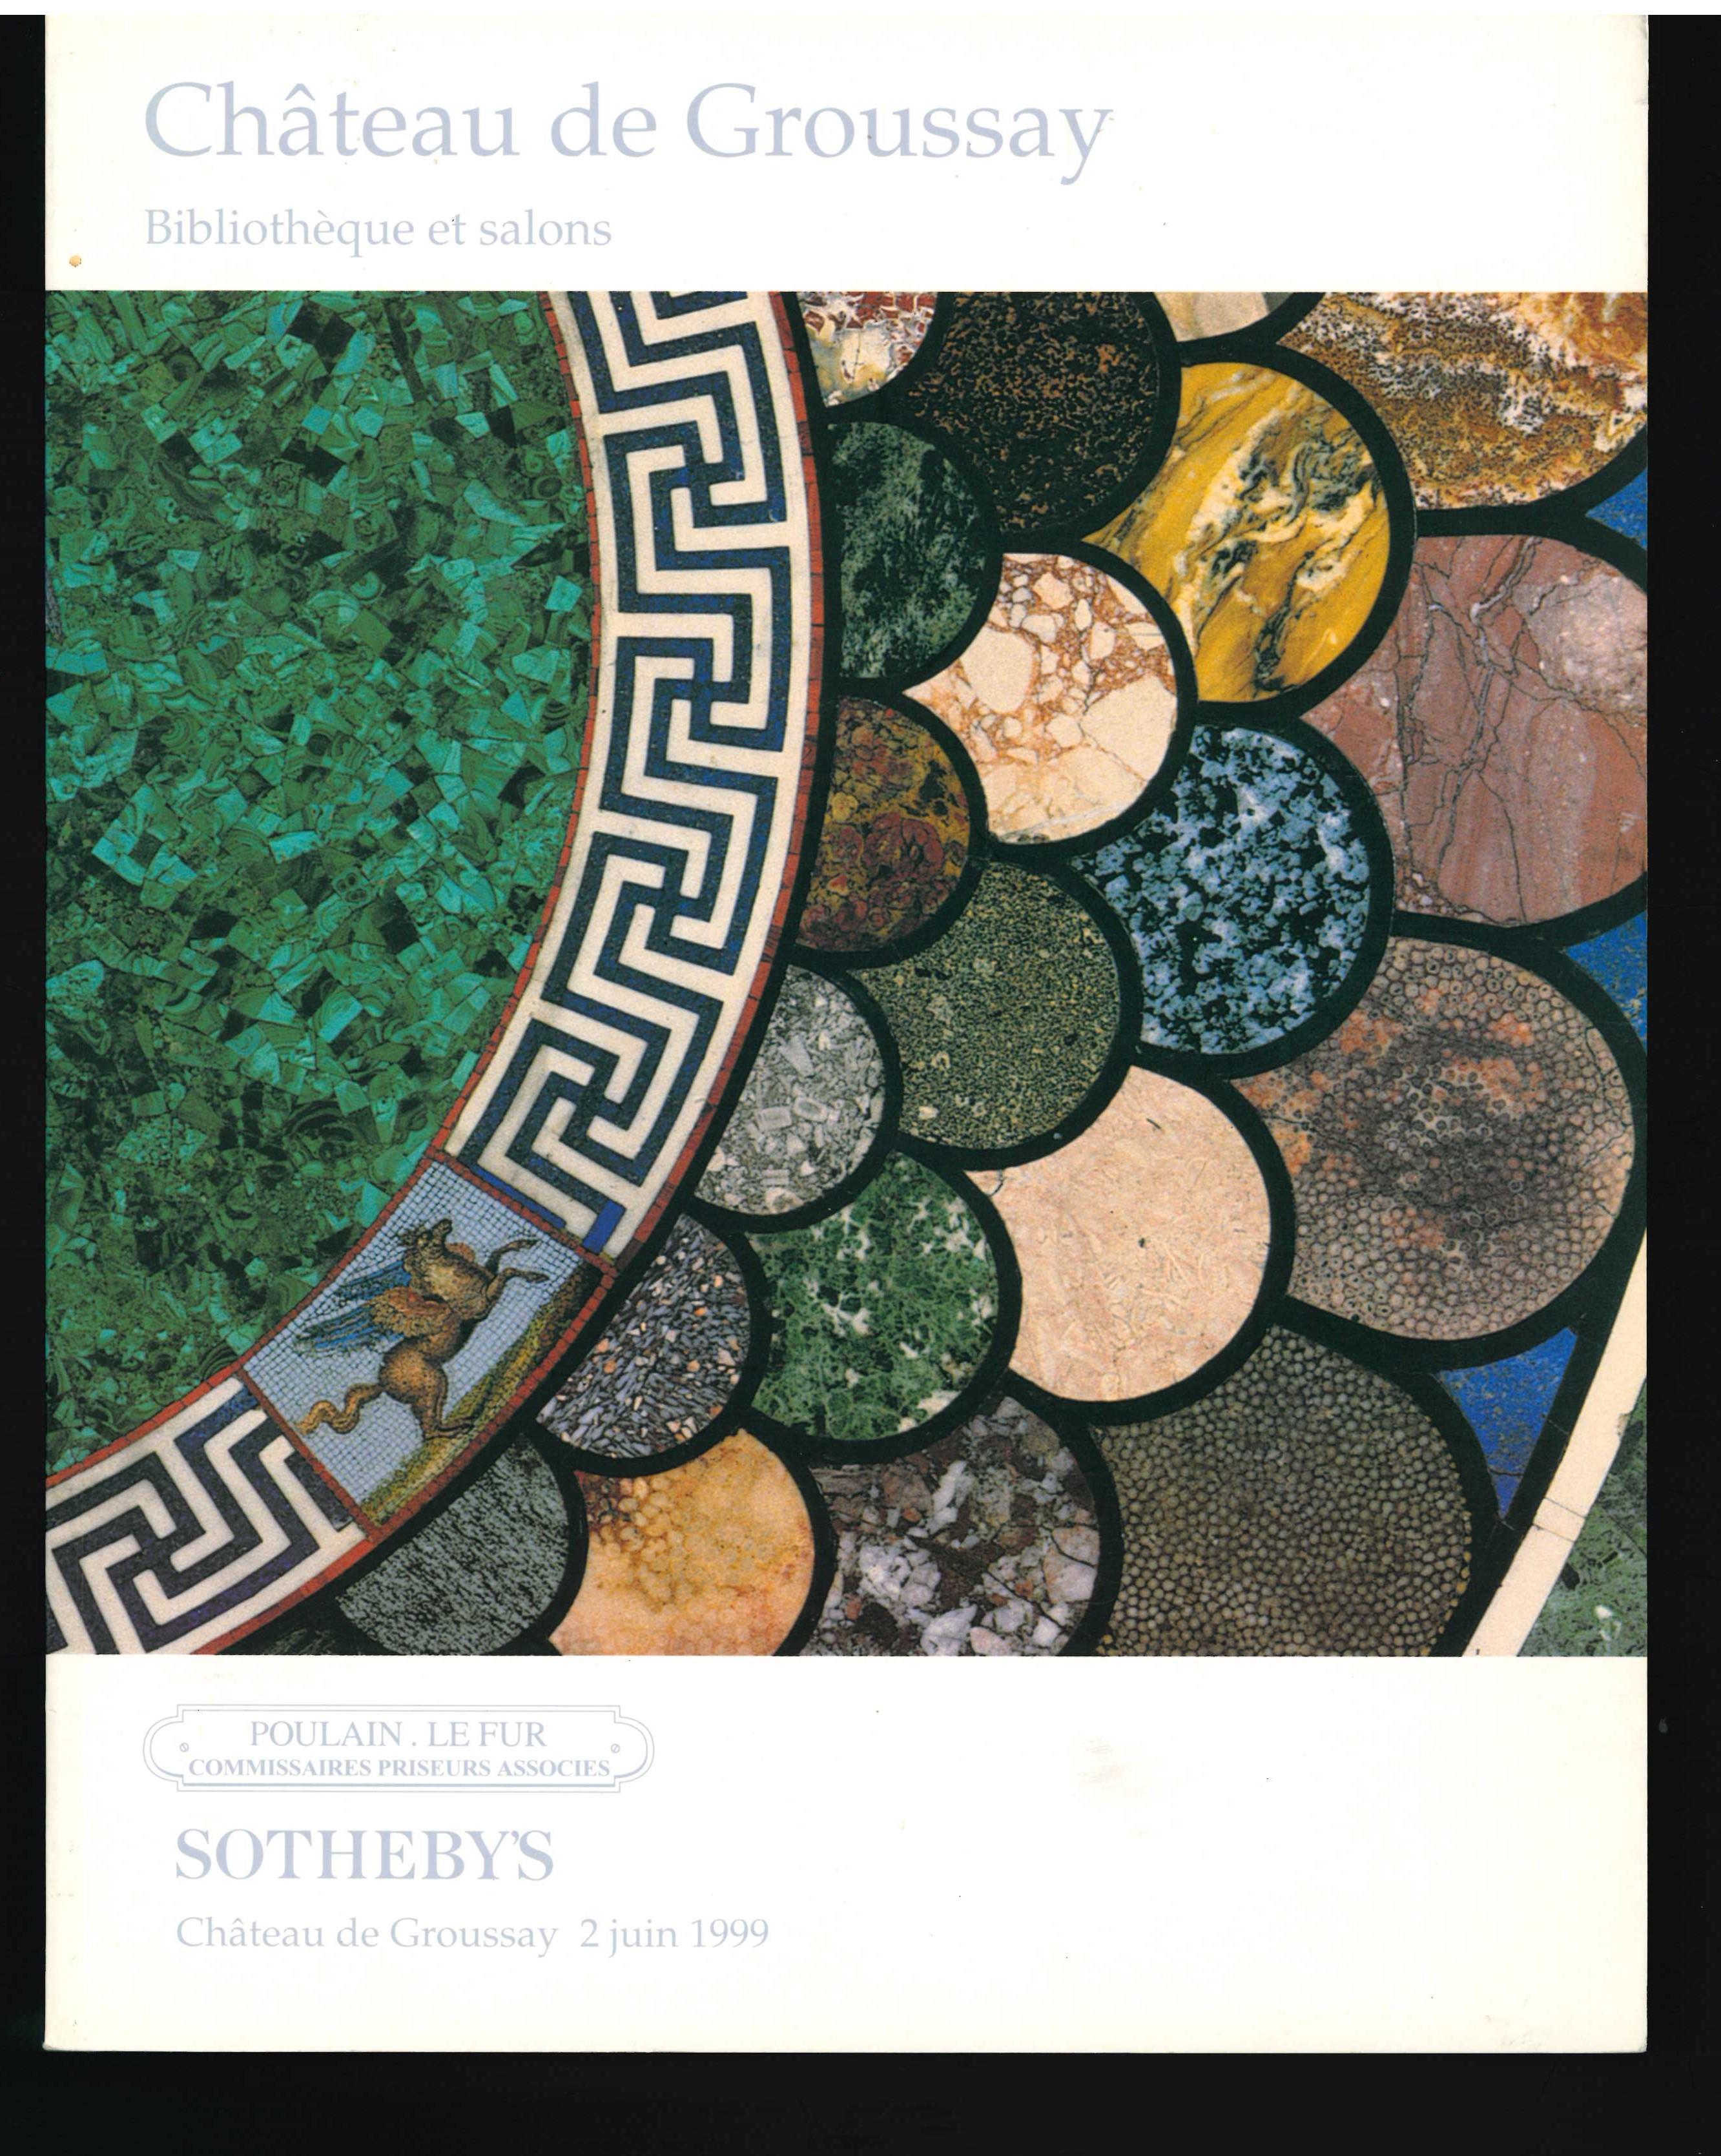 This is a four volume boxed set of the sales catalogues produced by Sotheby's for the contents of this famed collection. The sale took place over 4 days in June 1999 and realized a total of $26.5 million. Many of the contents on the day of the sale